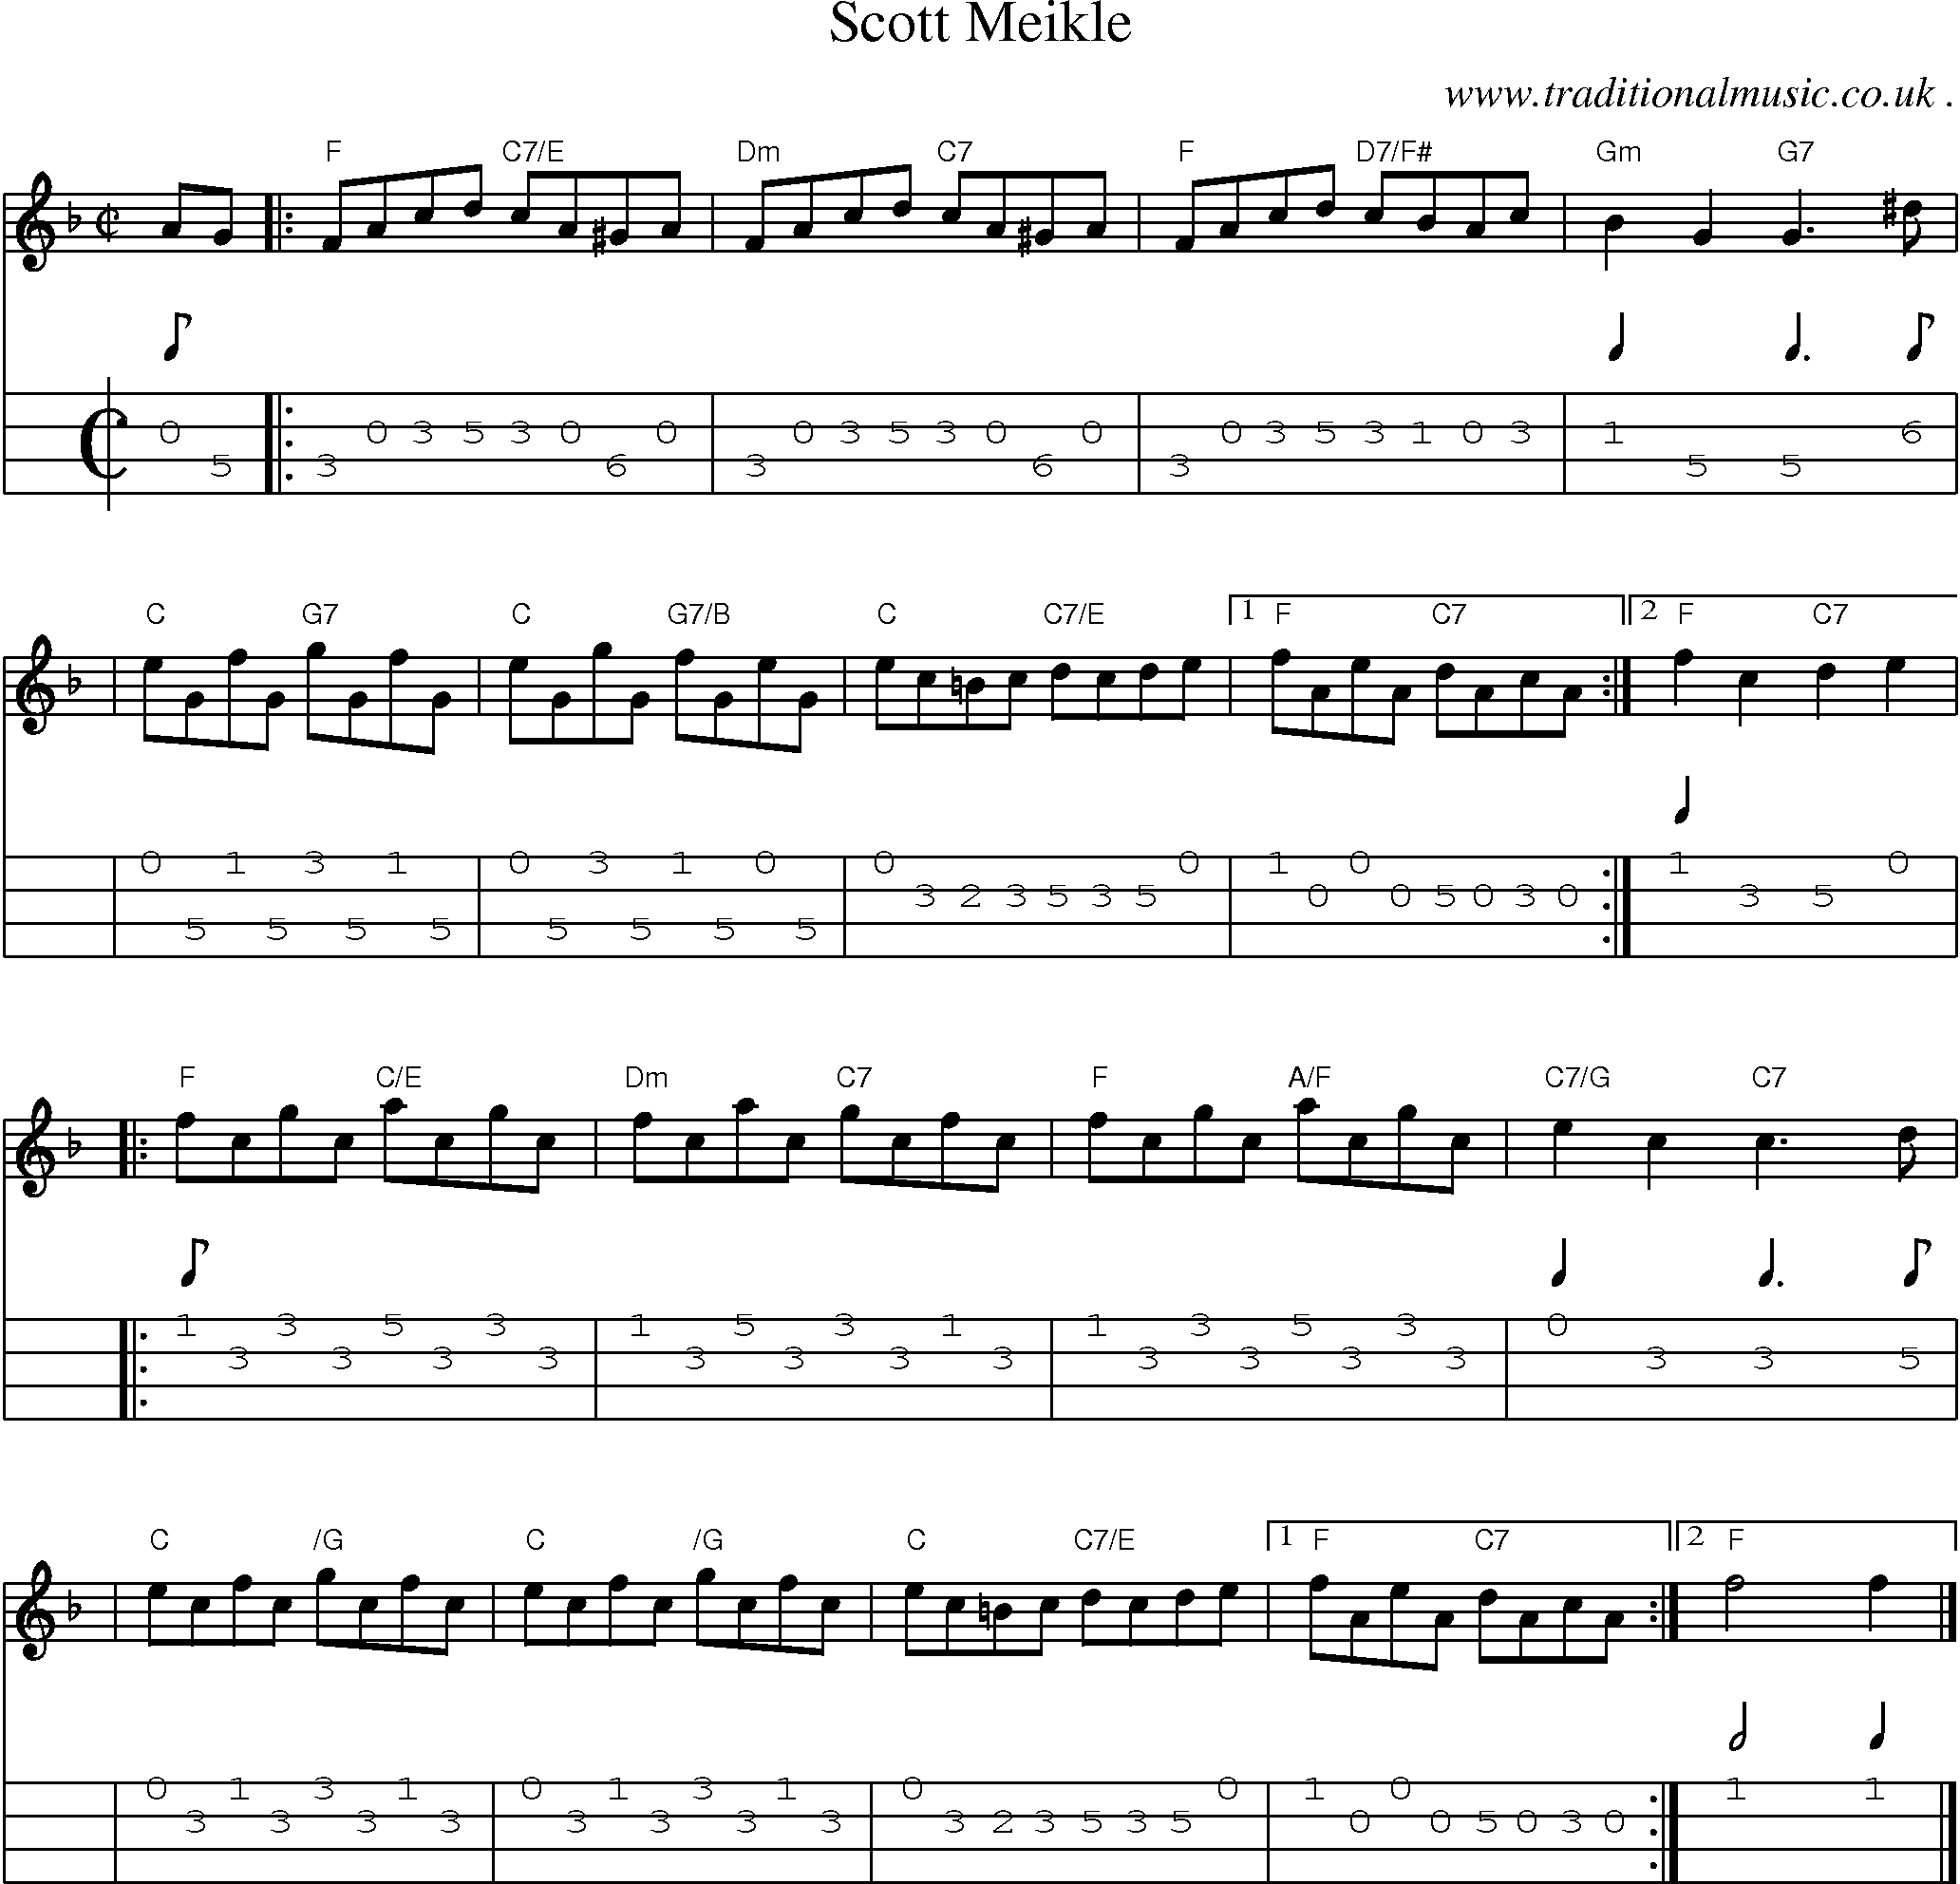 Sheet-music  score, Chords and Mandolin Tabs for Scott Meikle